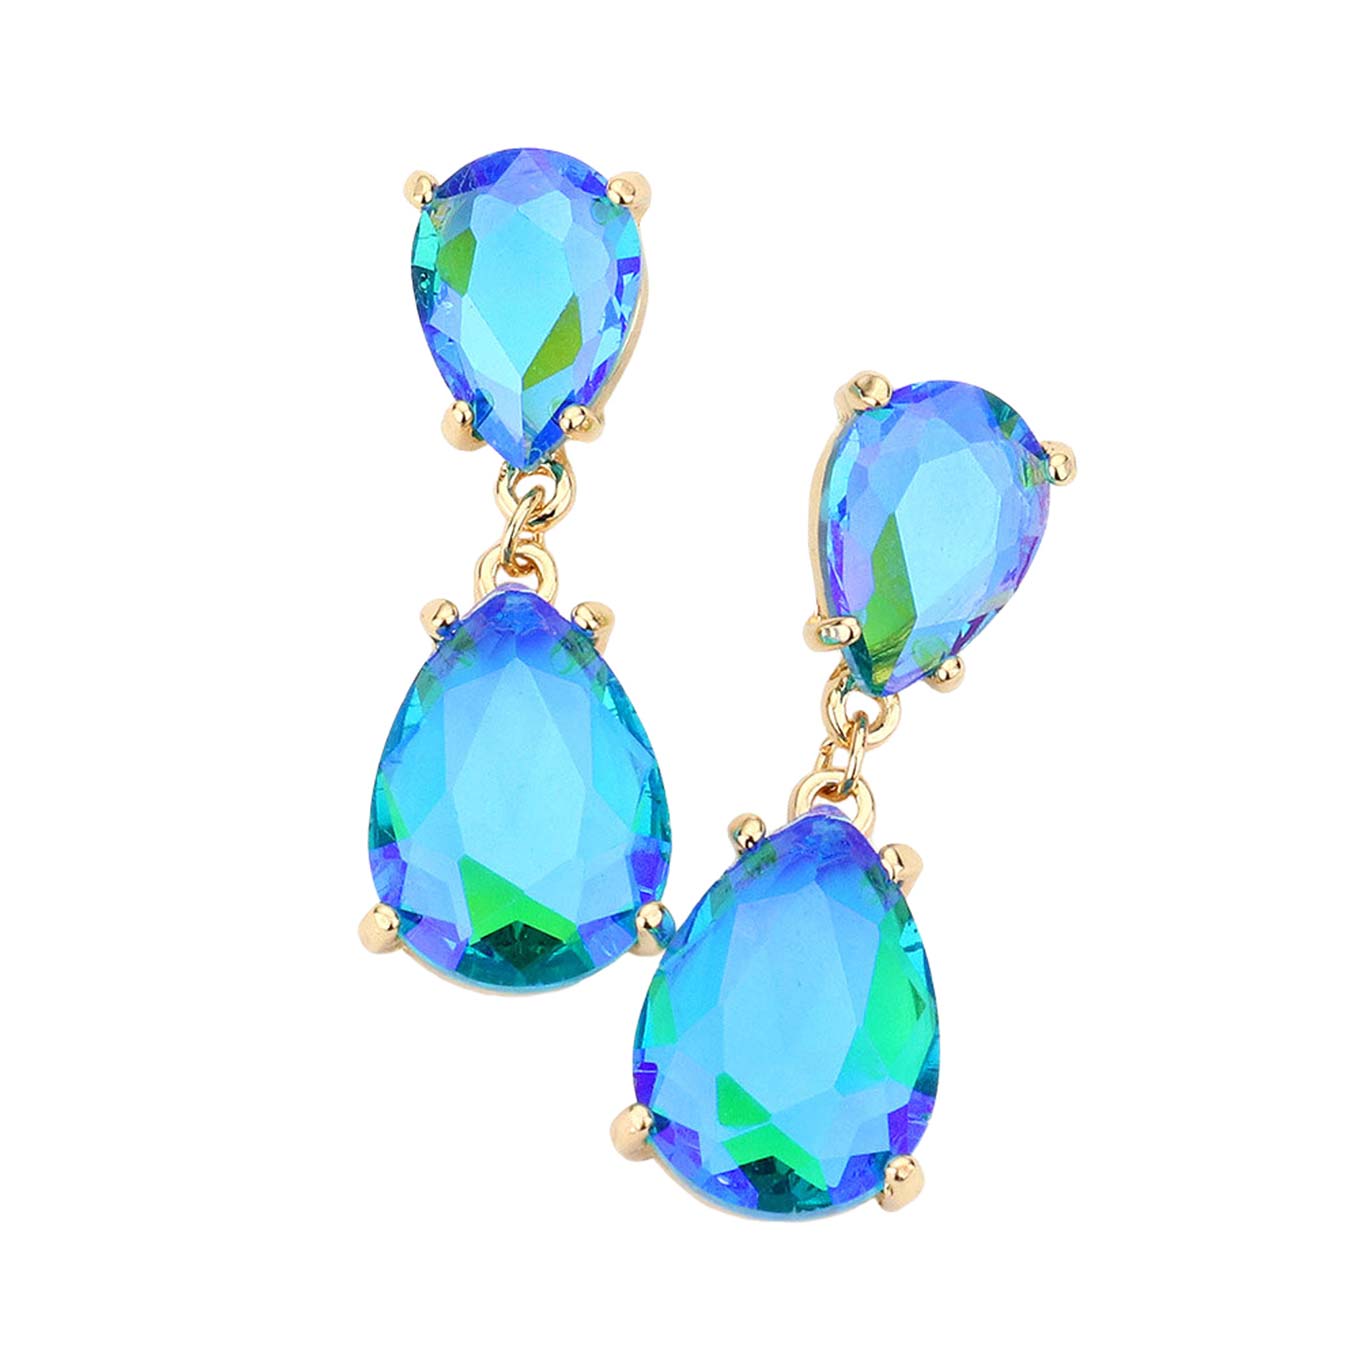 Blue Double Teardrop Link Dangle Evening Earrings, Beautiful teardrop-shaped dangle drop earrings. These elegant, comfortable earrings can be worn all day to dress up any outfit. Wear a pop of shine to complete your ensemble with a classy style. The perfect accessory for adding just the right amount of shimmer and a touch of class to special events. Jewelry that fits your lifestyle and makes your moments awesome!